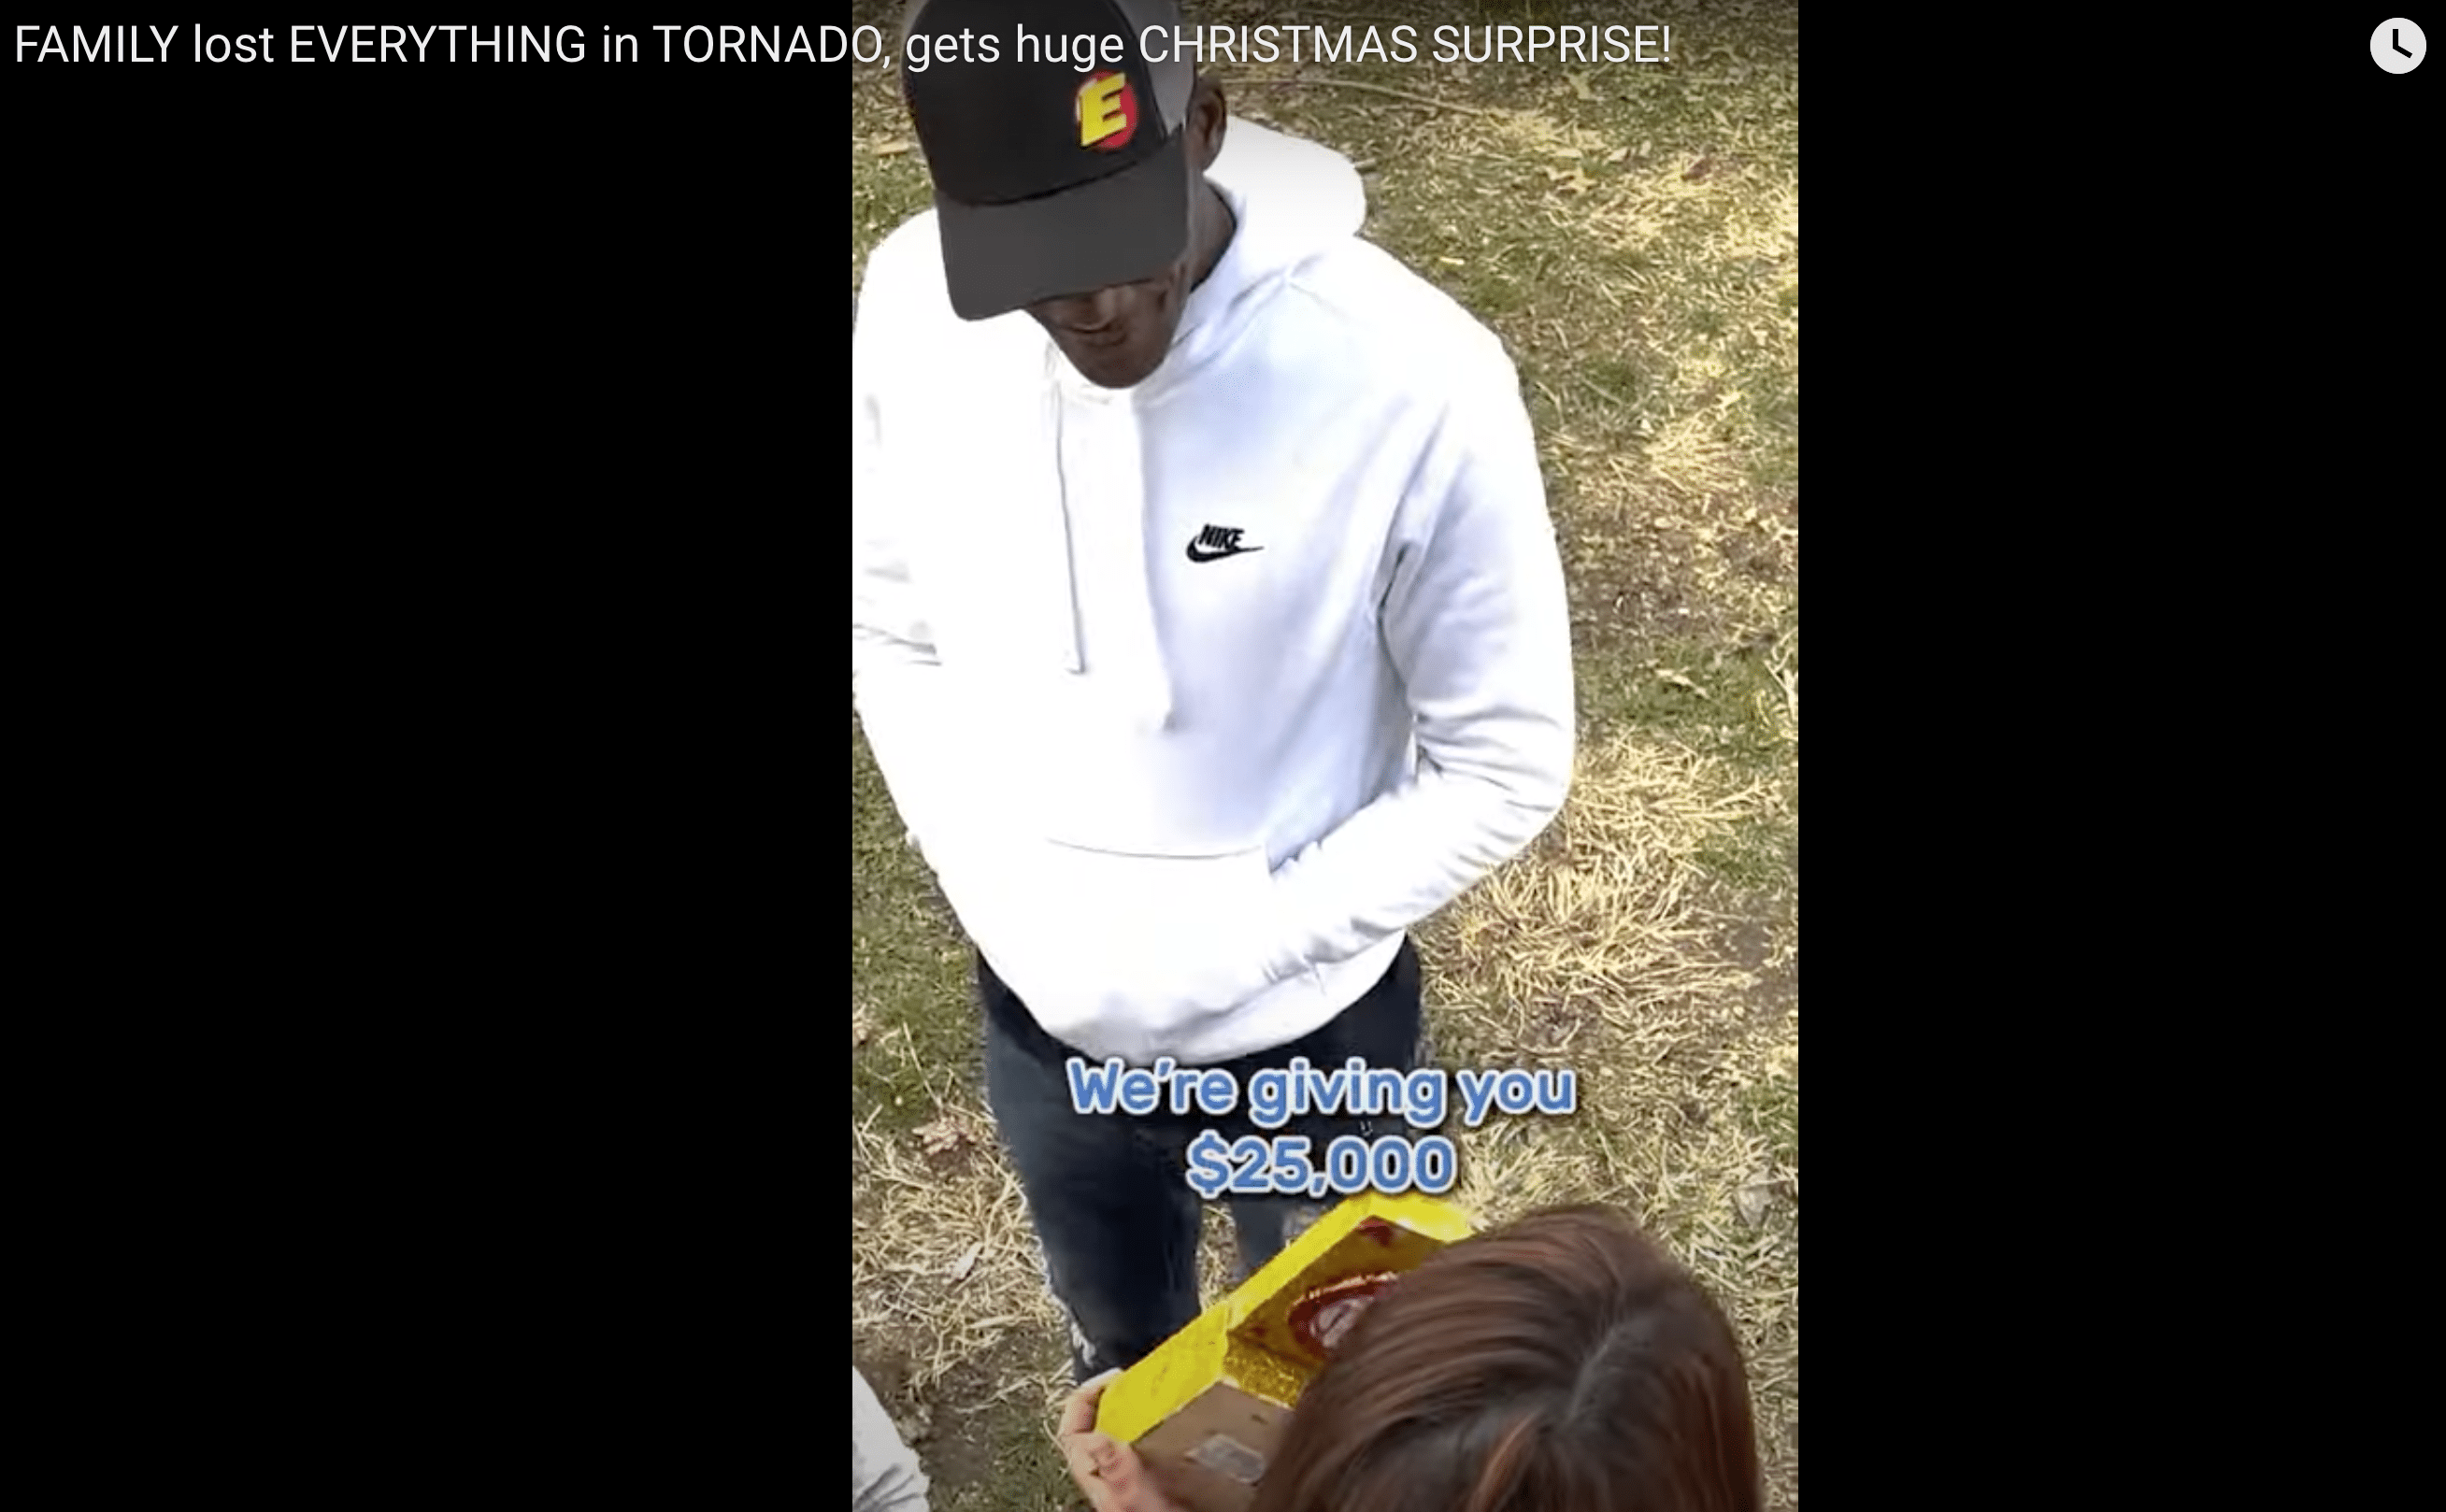 The woman receiving their first gift. | Source: Youtube.com/CharlieRocket